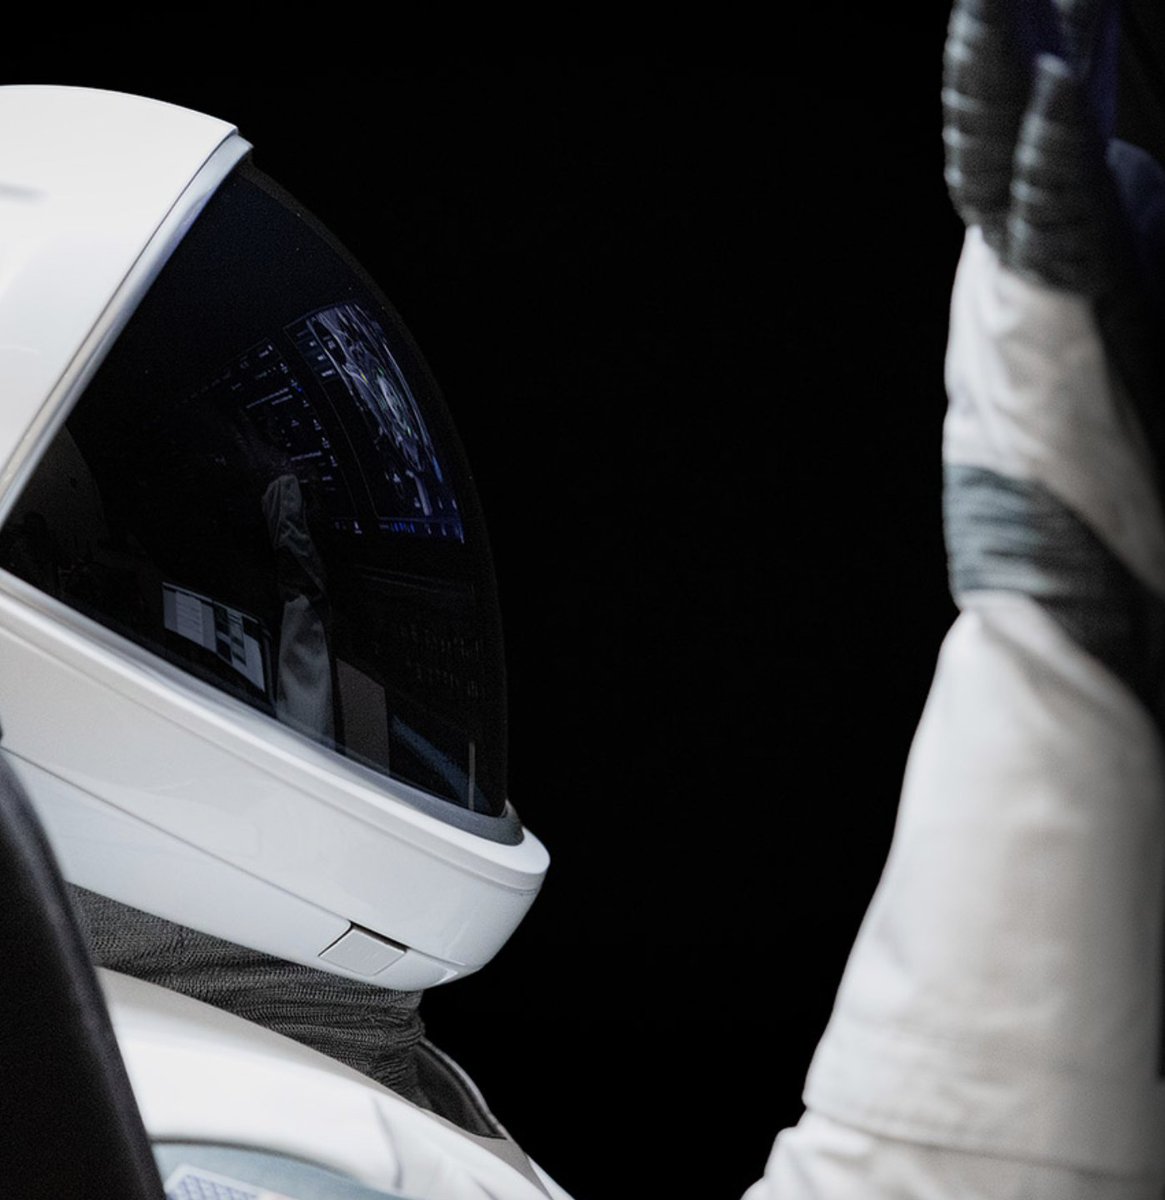 SpaceX currently has human spaceflight seats available for Earth Orbit missions in late 2024. You book a flight to Space, get a custom SpaceX suit made for you and spend 3-6 days orbiting Earth. Citizens can also book a flight to the ISS🚀 More info: spacex.com/humanspaceflig…